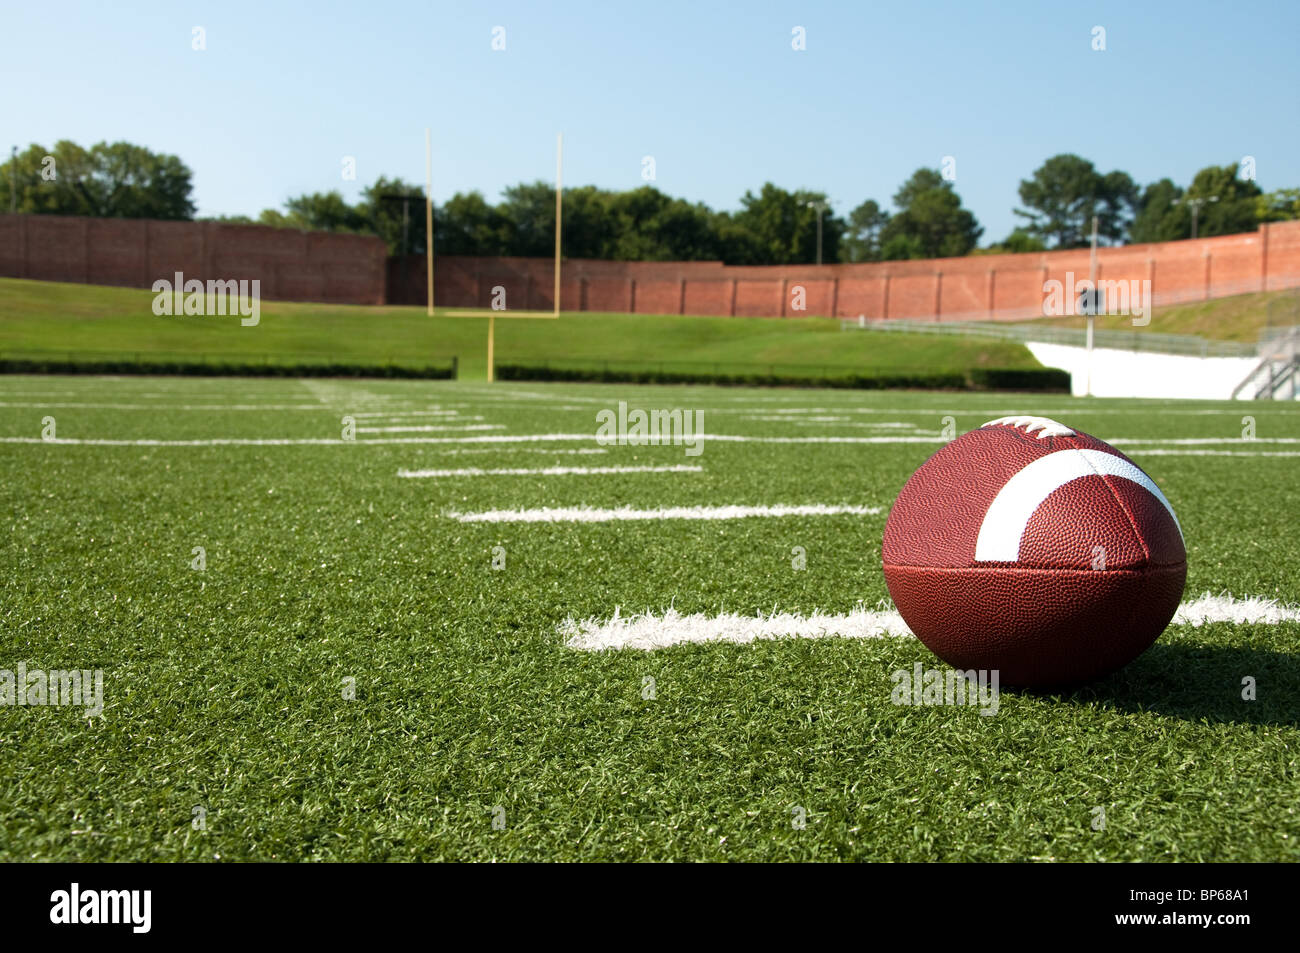 American Football On Field With Goal Post In Background Stock Photo Alamy